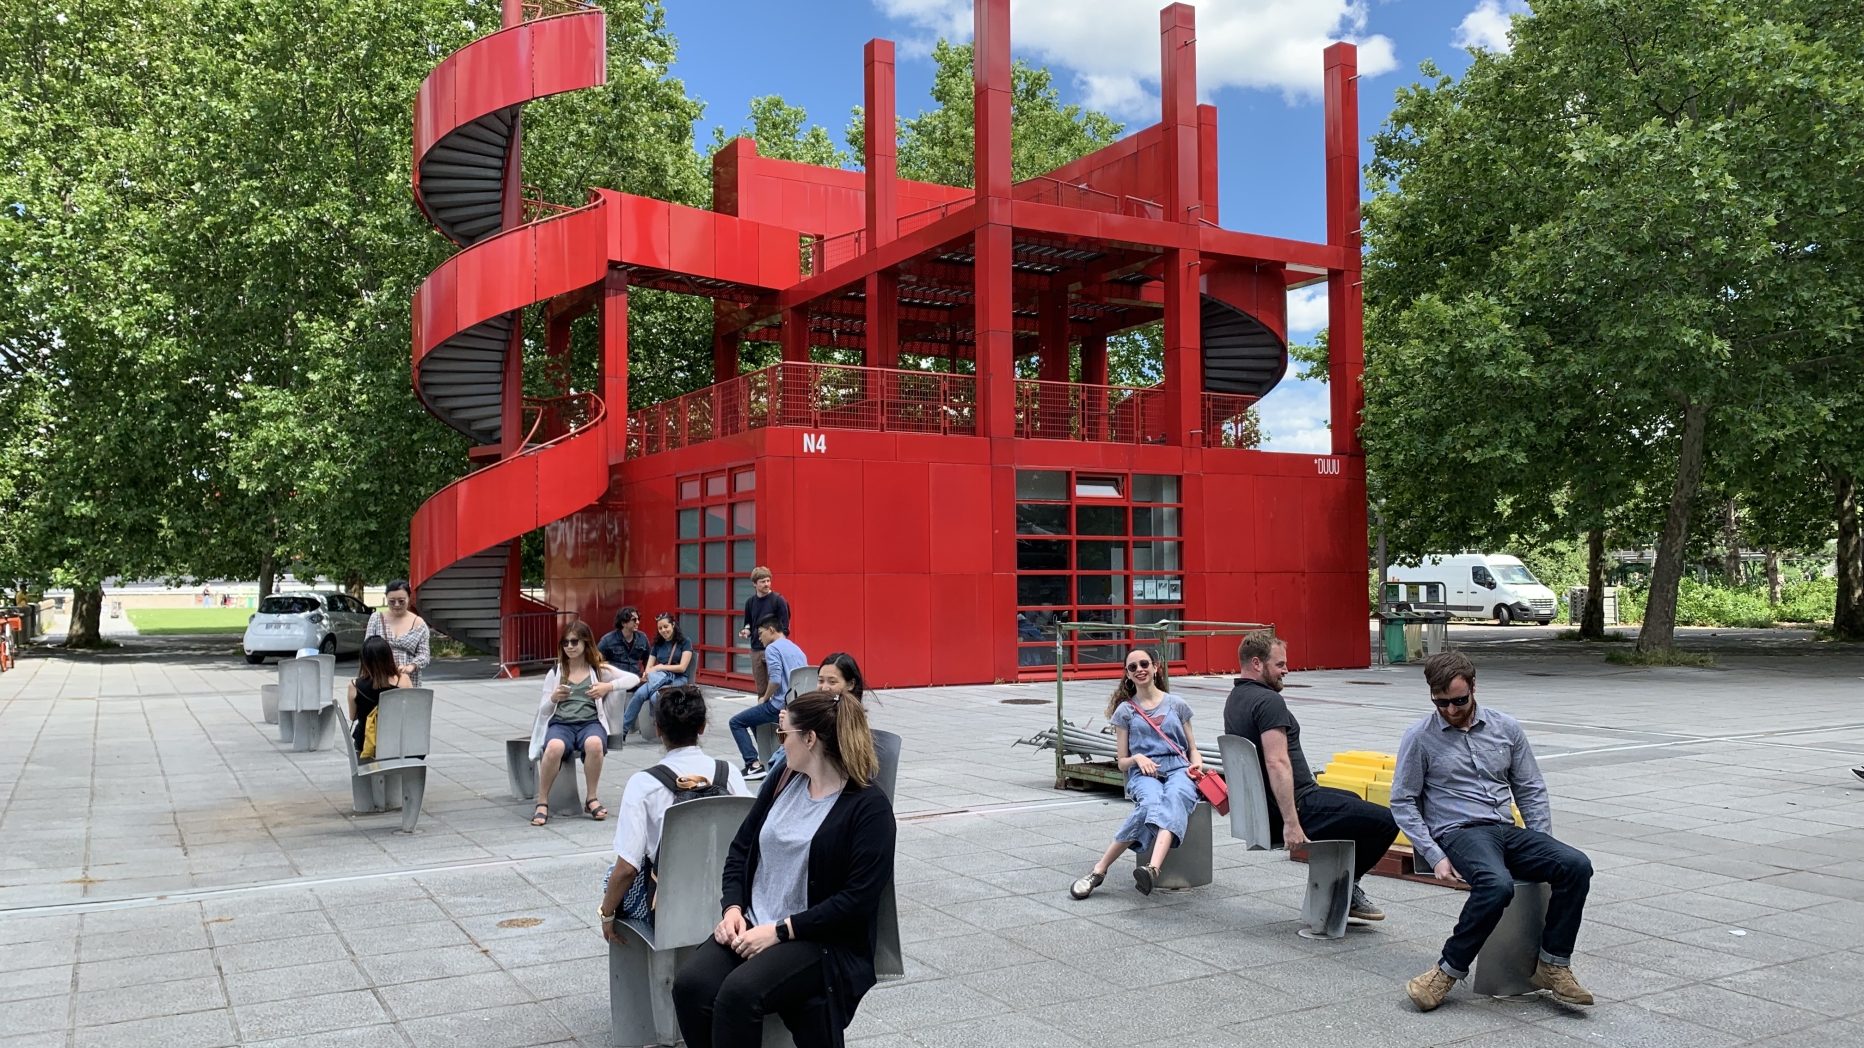 Red metal building with eccentric structure and outdoor seating area